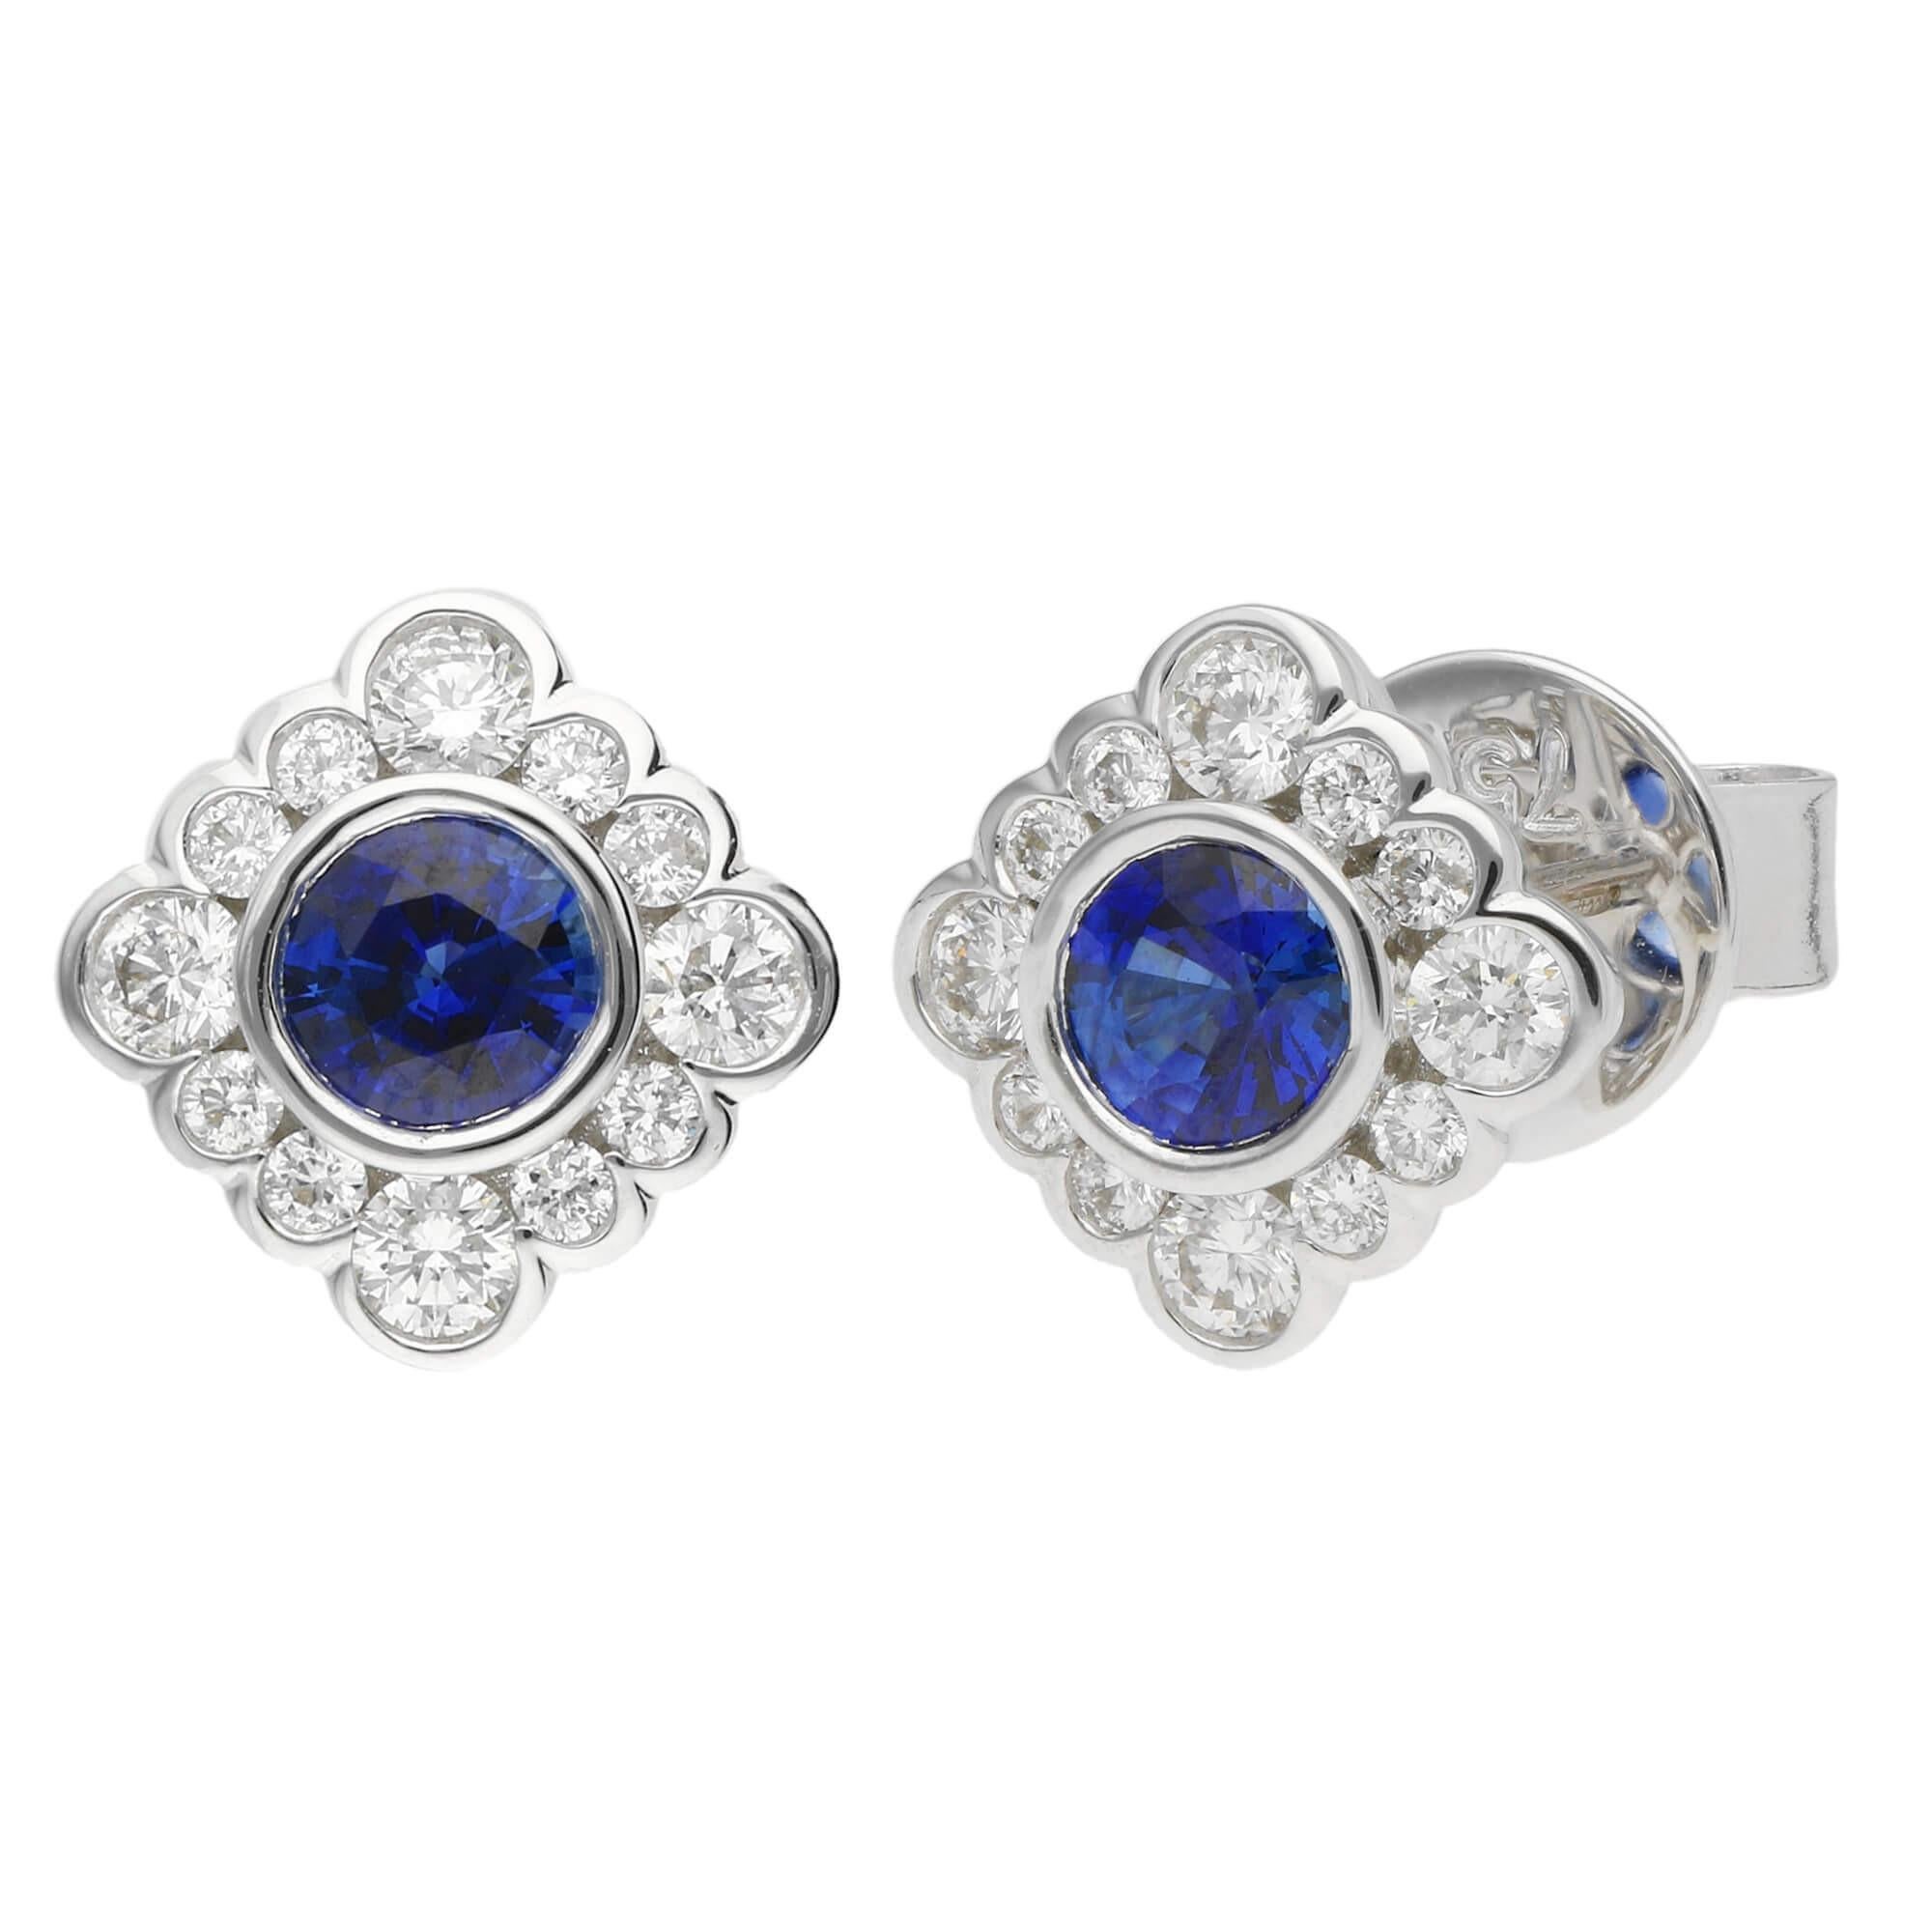 Art Deco Inspired 18ct White Gold Sapphire and Diamond Cluster Stud Earrings

Expertly crafted with a nod to the elegant geometries of Art Deco design, these stunning 18ct white gold stud earrings exude sophistication and sparkle. Each earring is